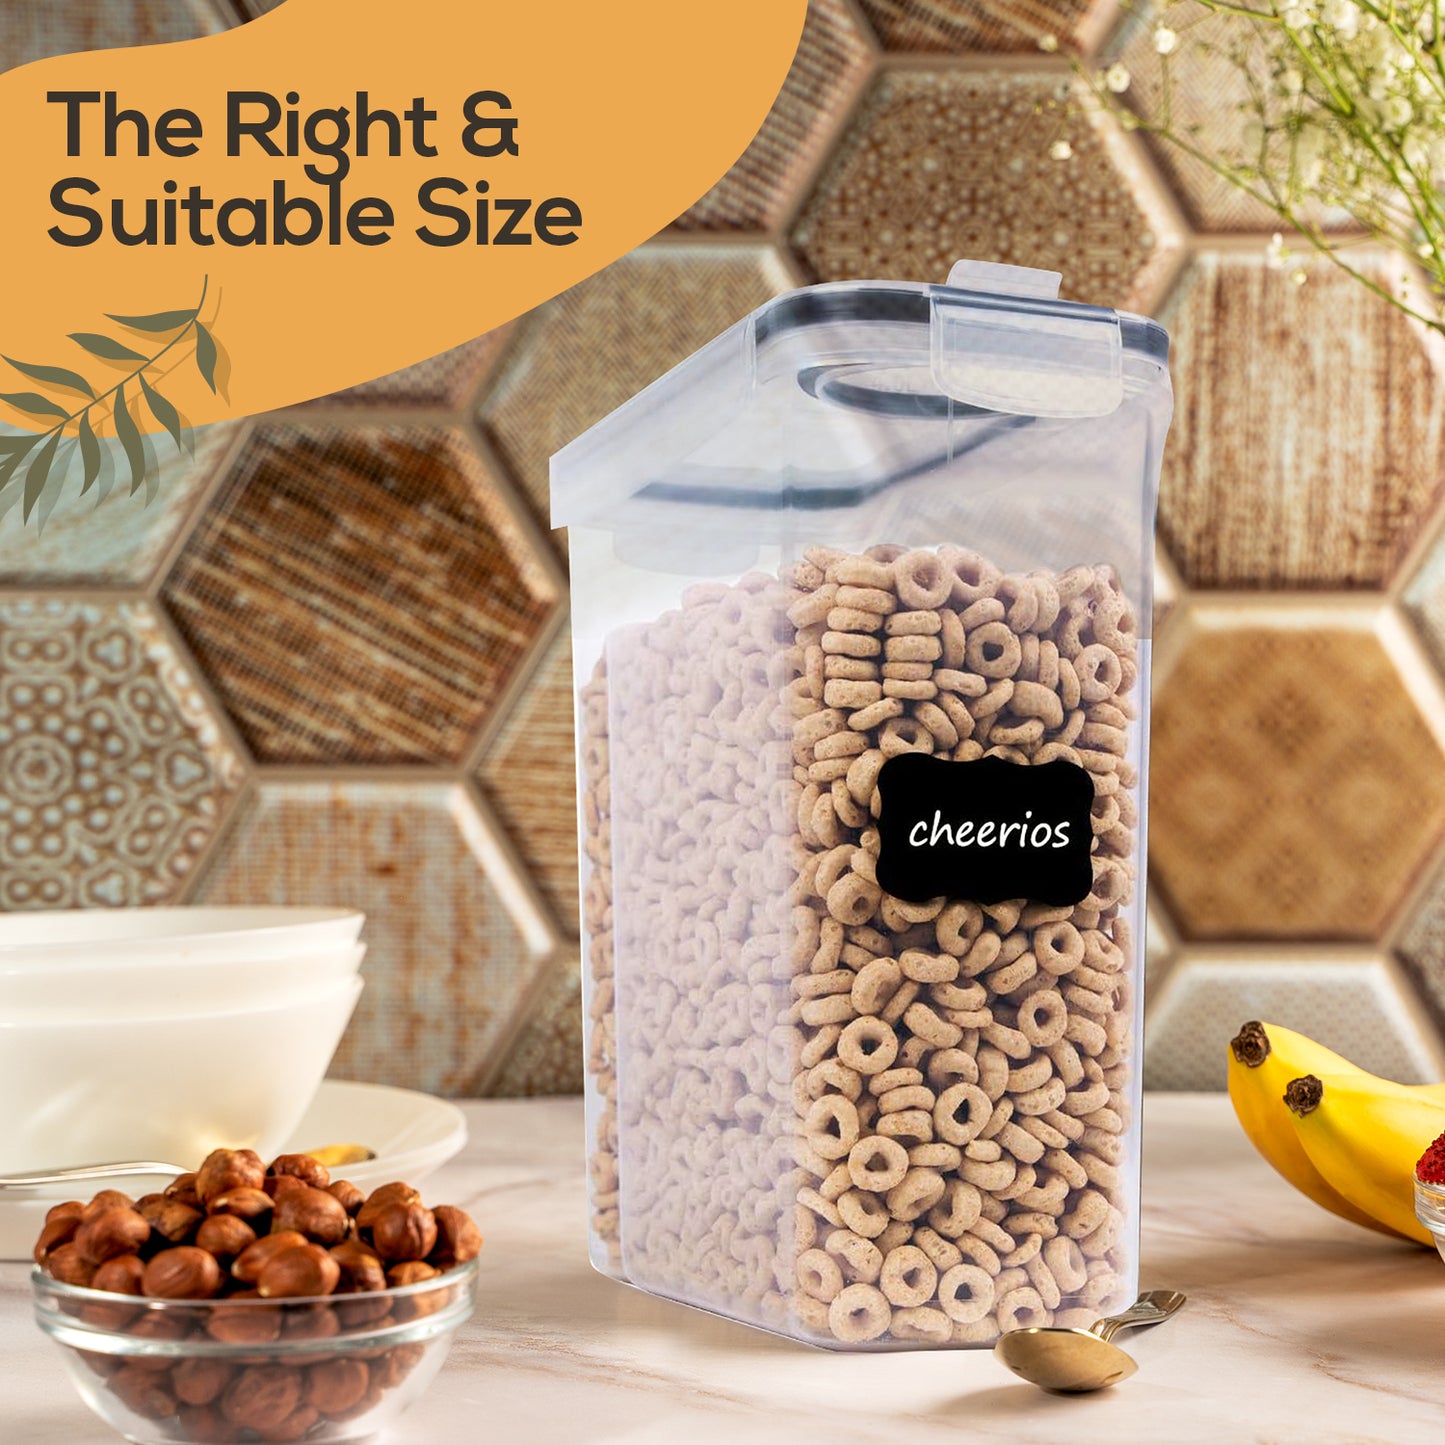 4L Cereal Containers Airtight Food Storage for Kitchen and Pantry Organization Canisters for, Dry Pet Food, Flour, Sugar, Rice, Nuts, Snacks & More